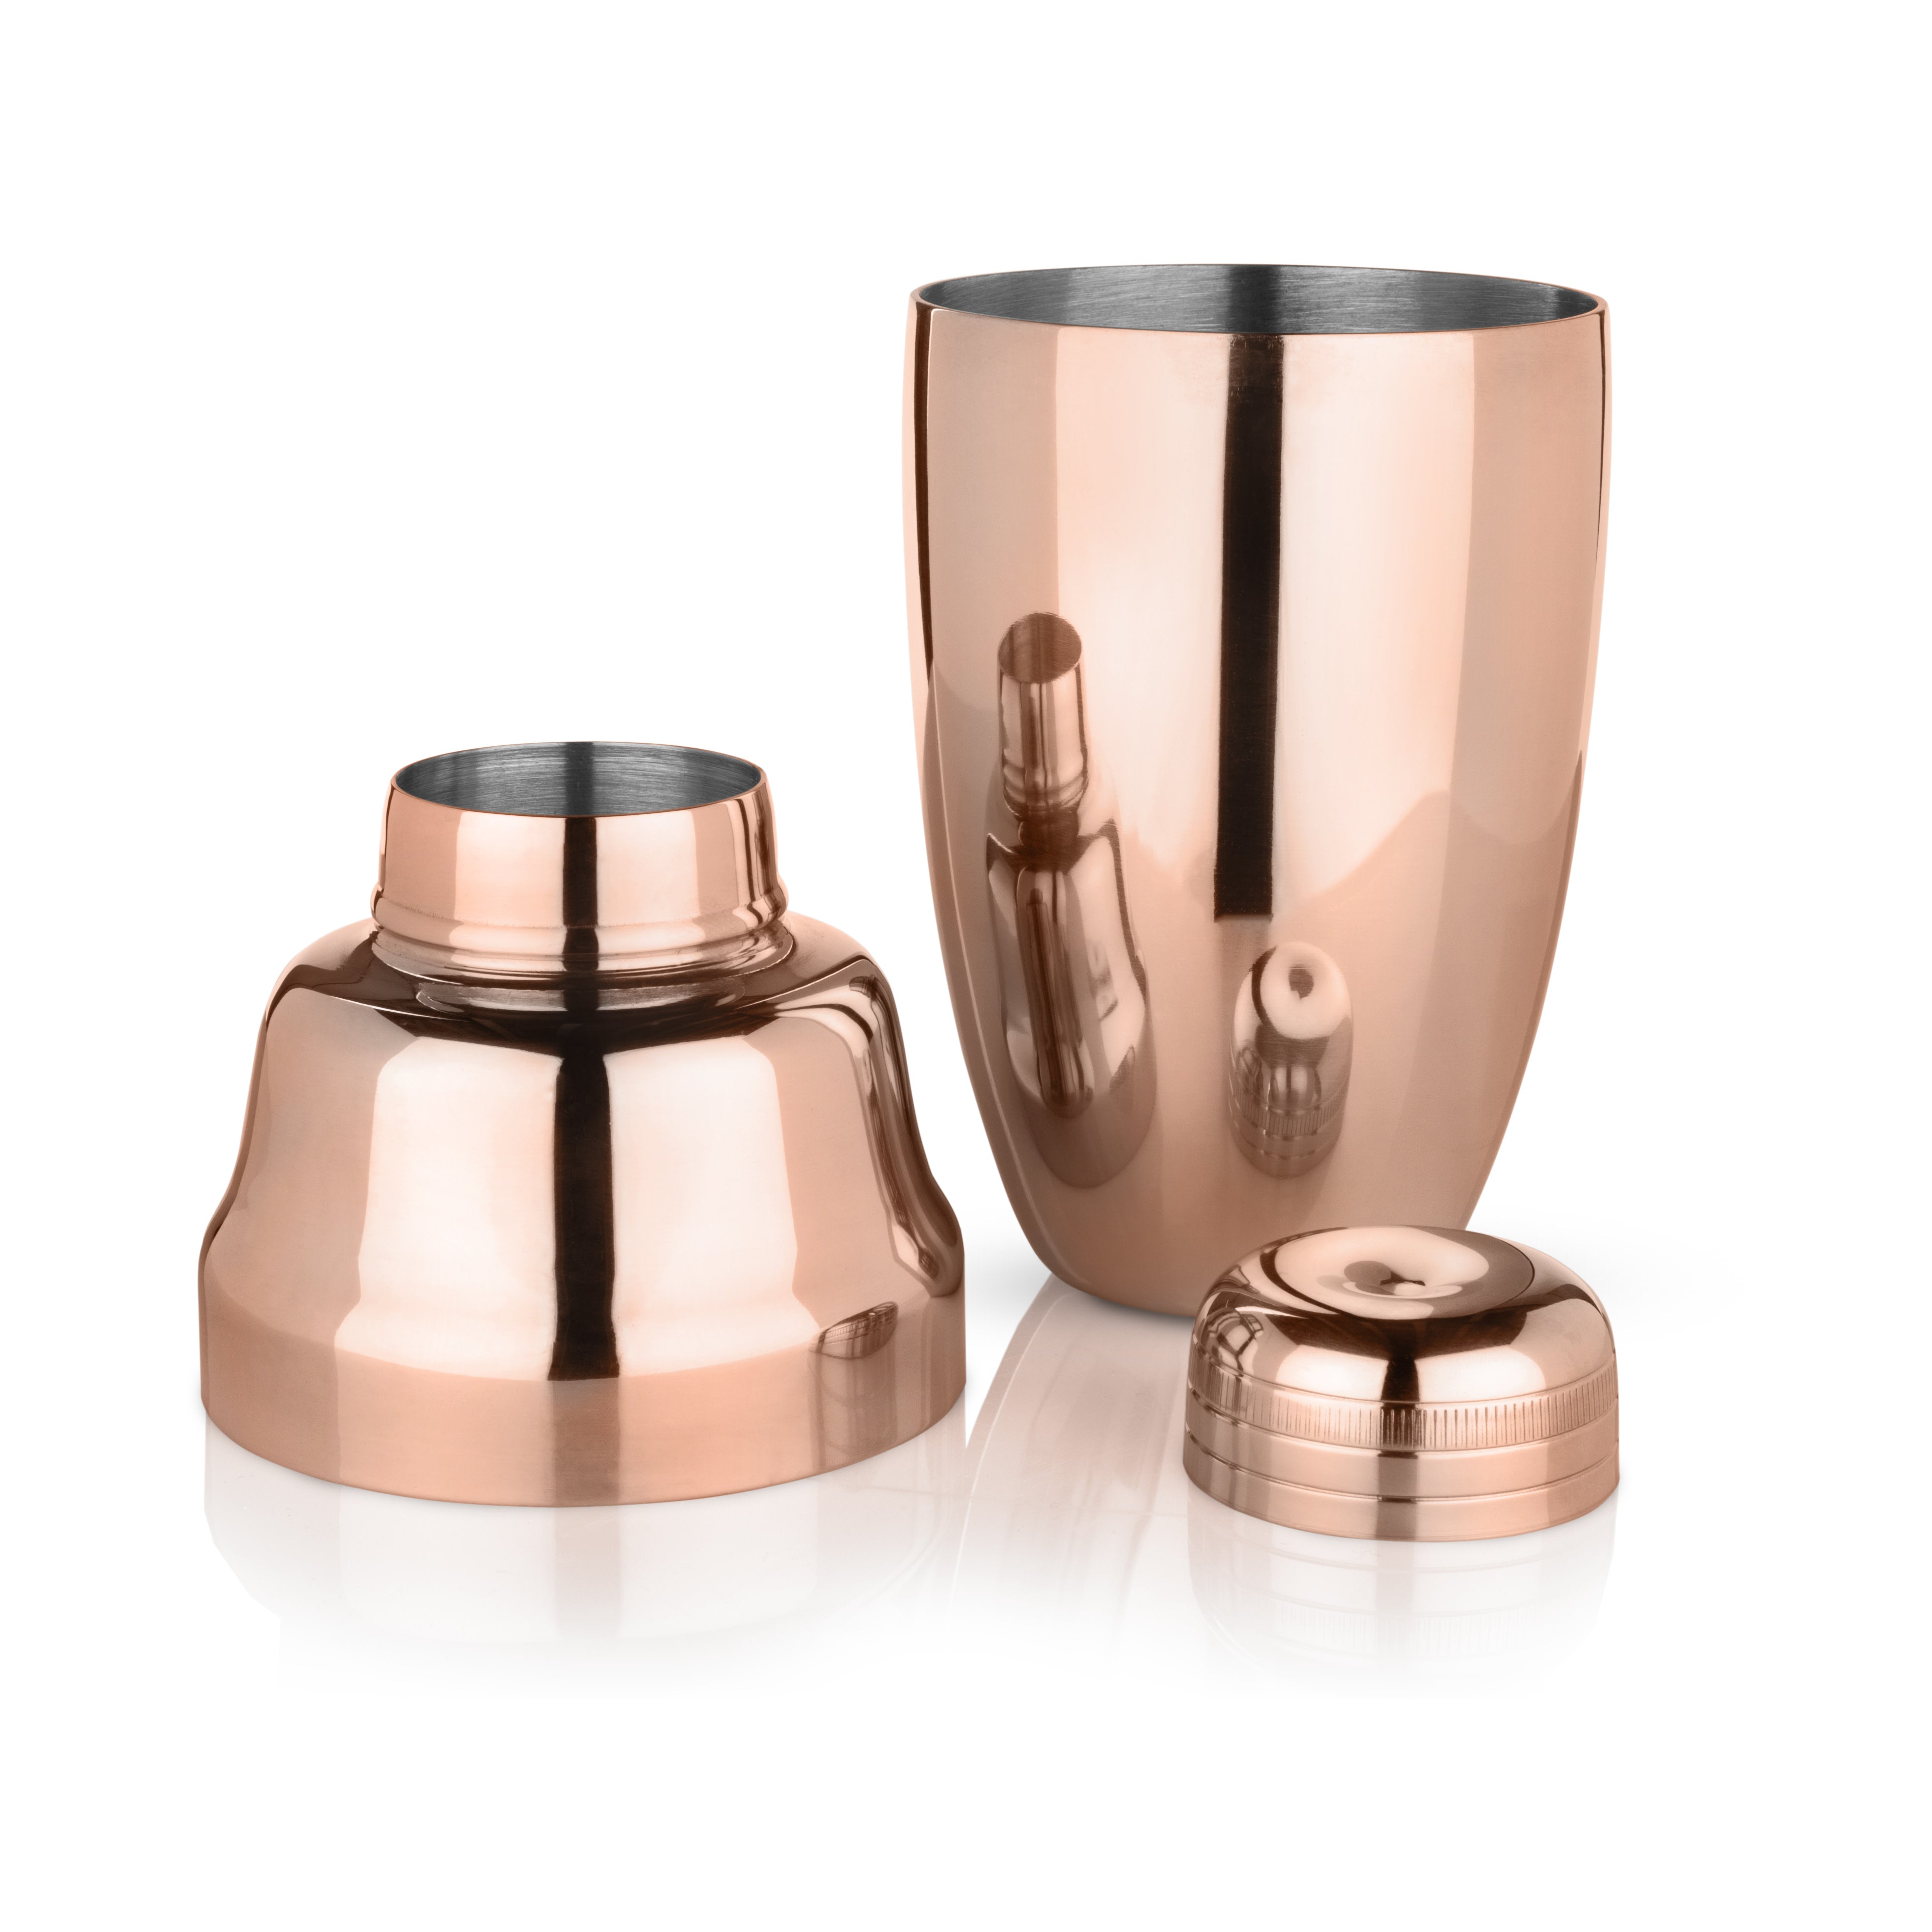 Mainstays 25-Ounce Stainless Steel Cocktail Shaker Copper - Each